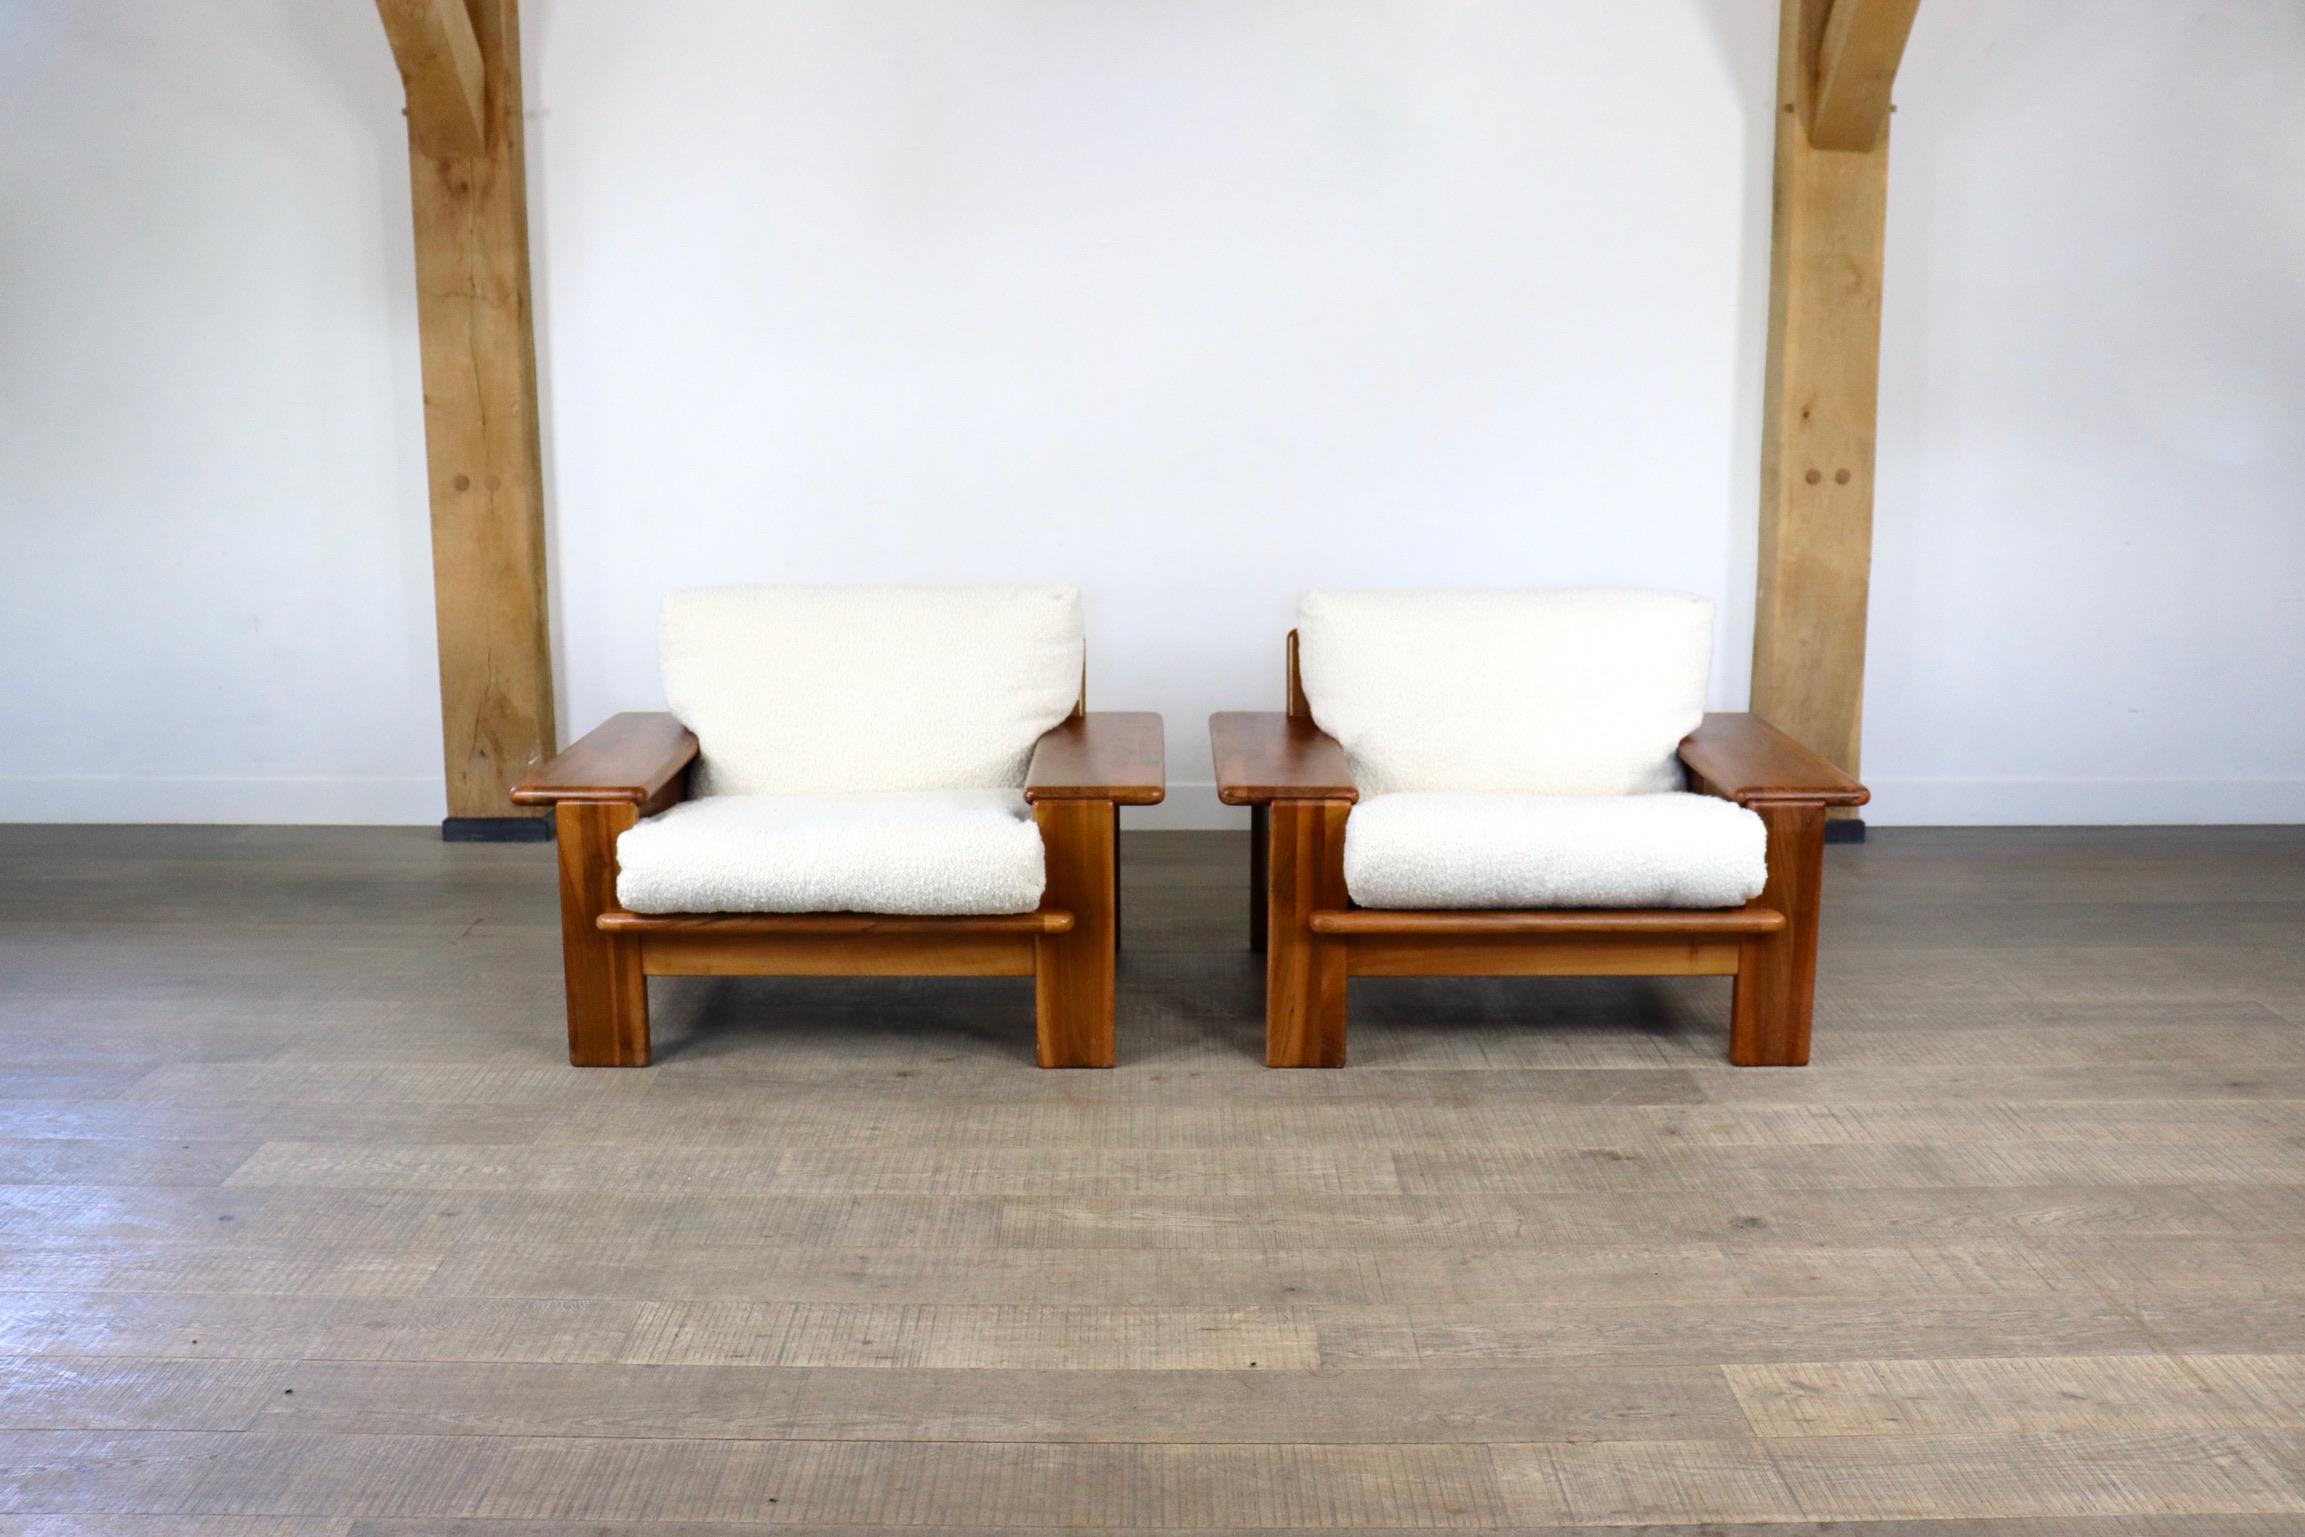 Incredible and rare pair of Mario Marenco Lounge chairs in solid walnut wood and bouclé cushions for Mobilgirgi, Italy 1970s. The large armrests give a luxurious feeling, complemented by the white bouclé cushions, which provide incredible comfort.